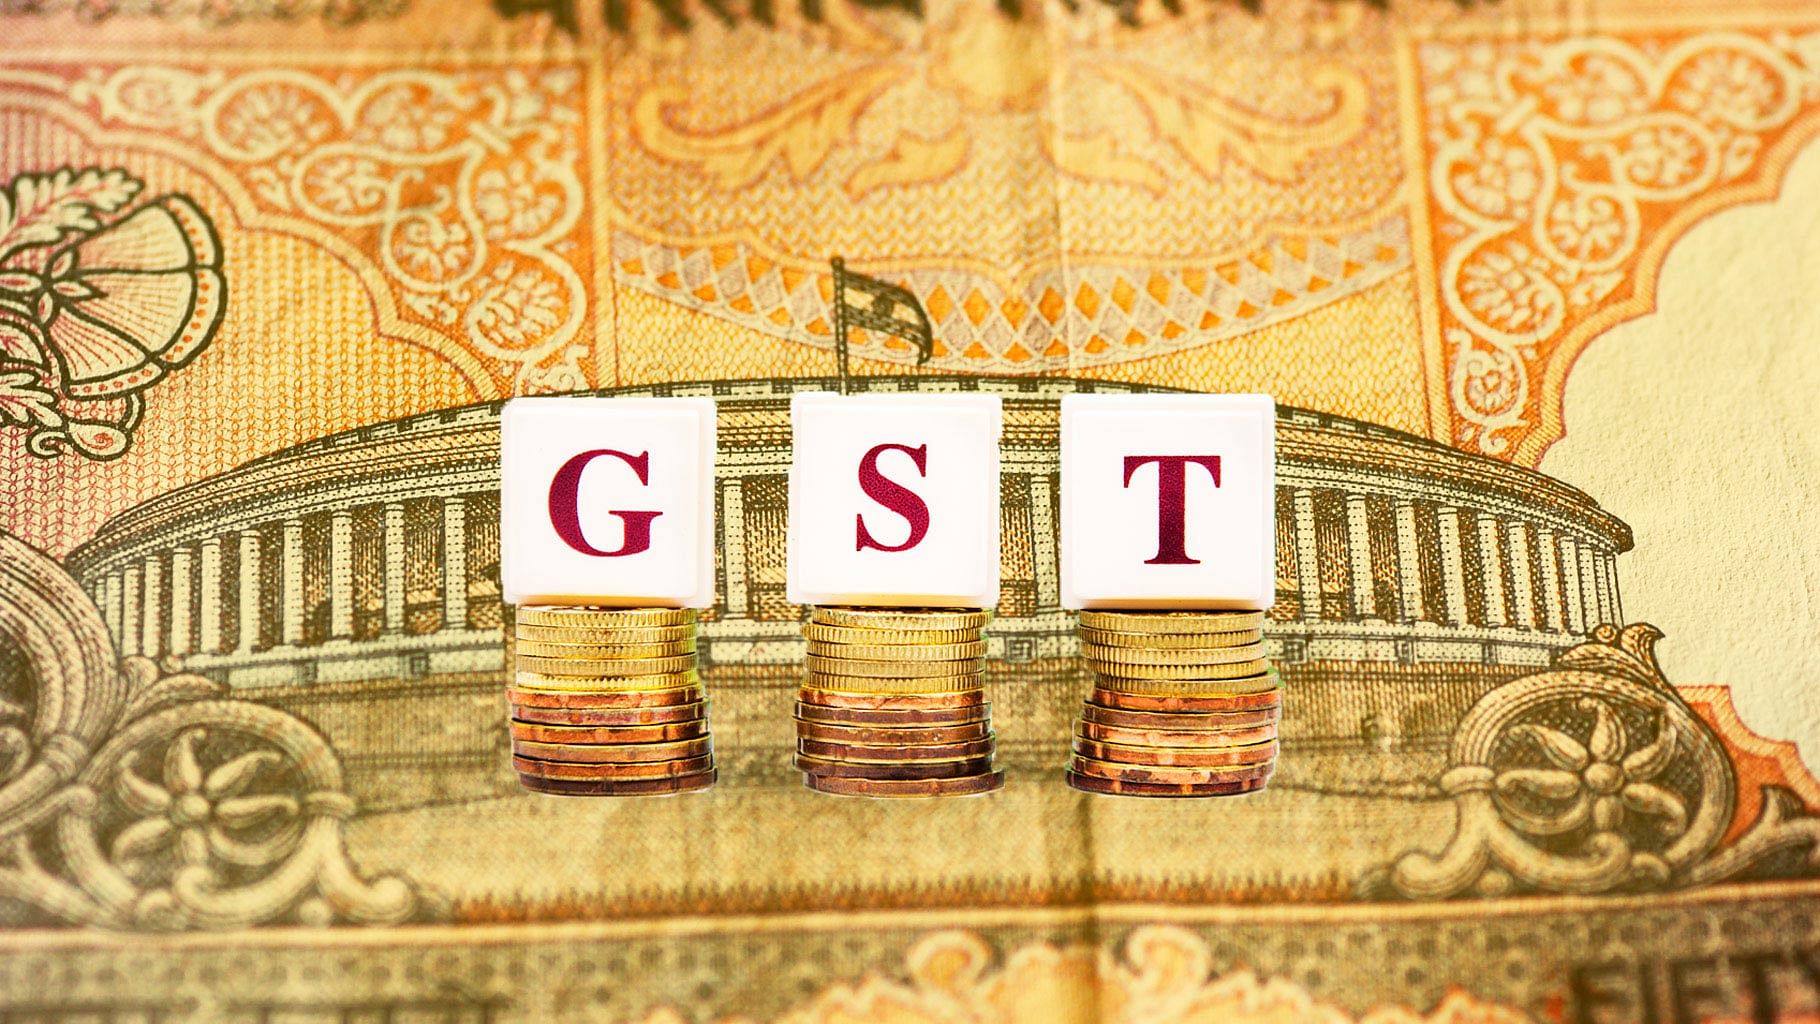 While India has come a long way from a complicated taxation system, with over a dozen different taxes and many more cesses, GST is still far away from an ideal taxation regime.